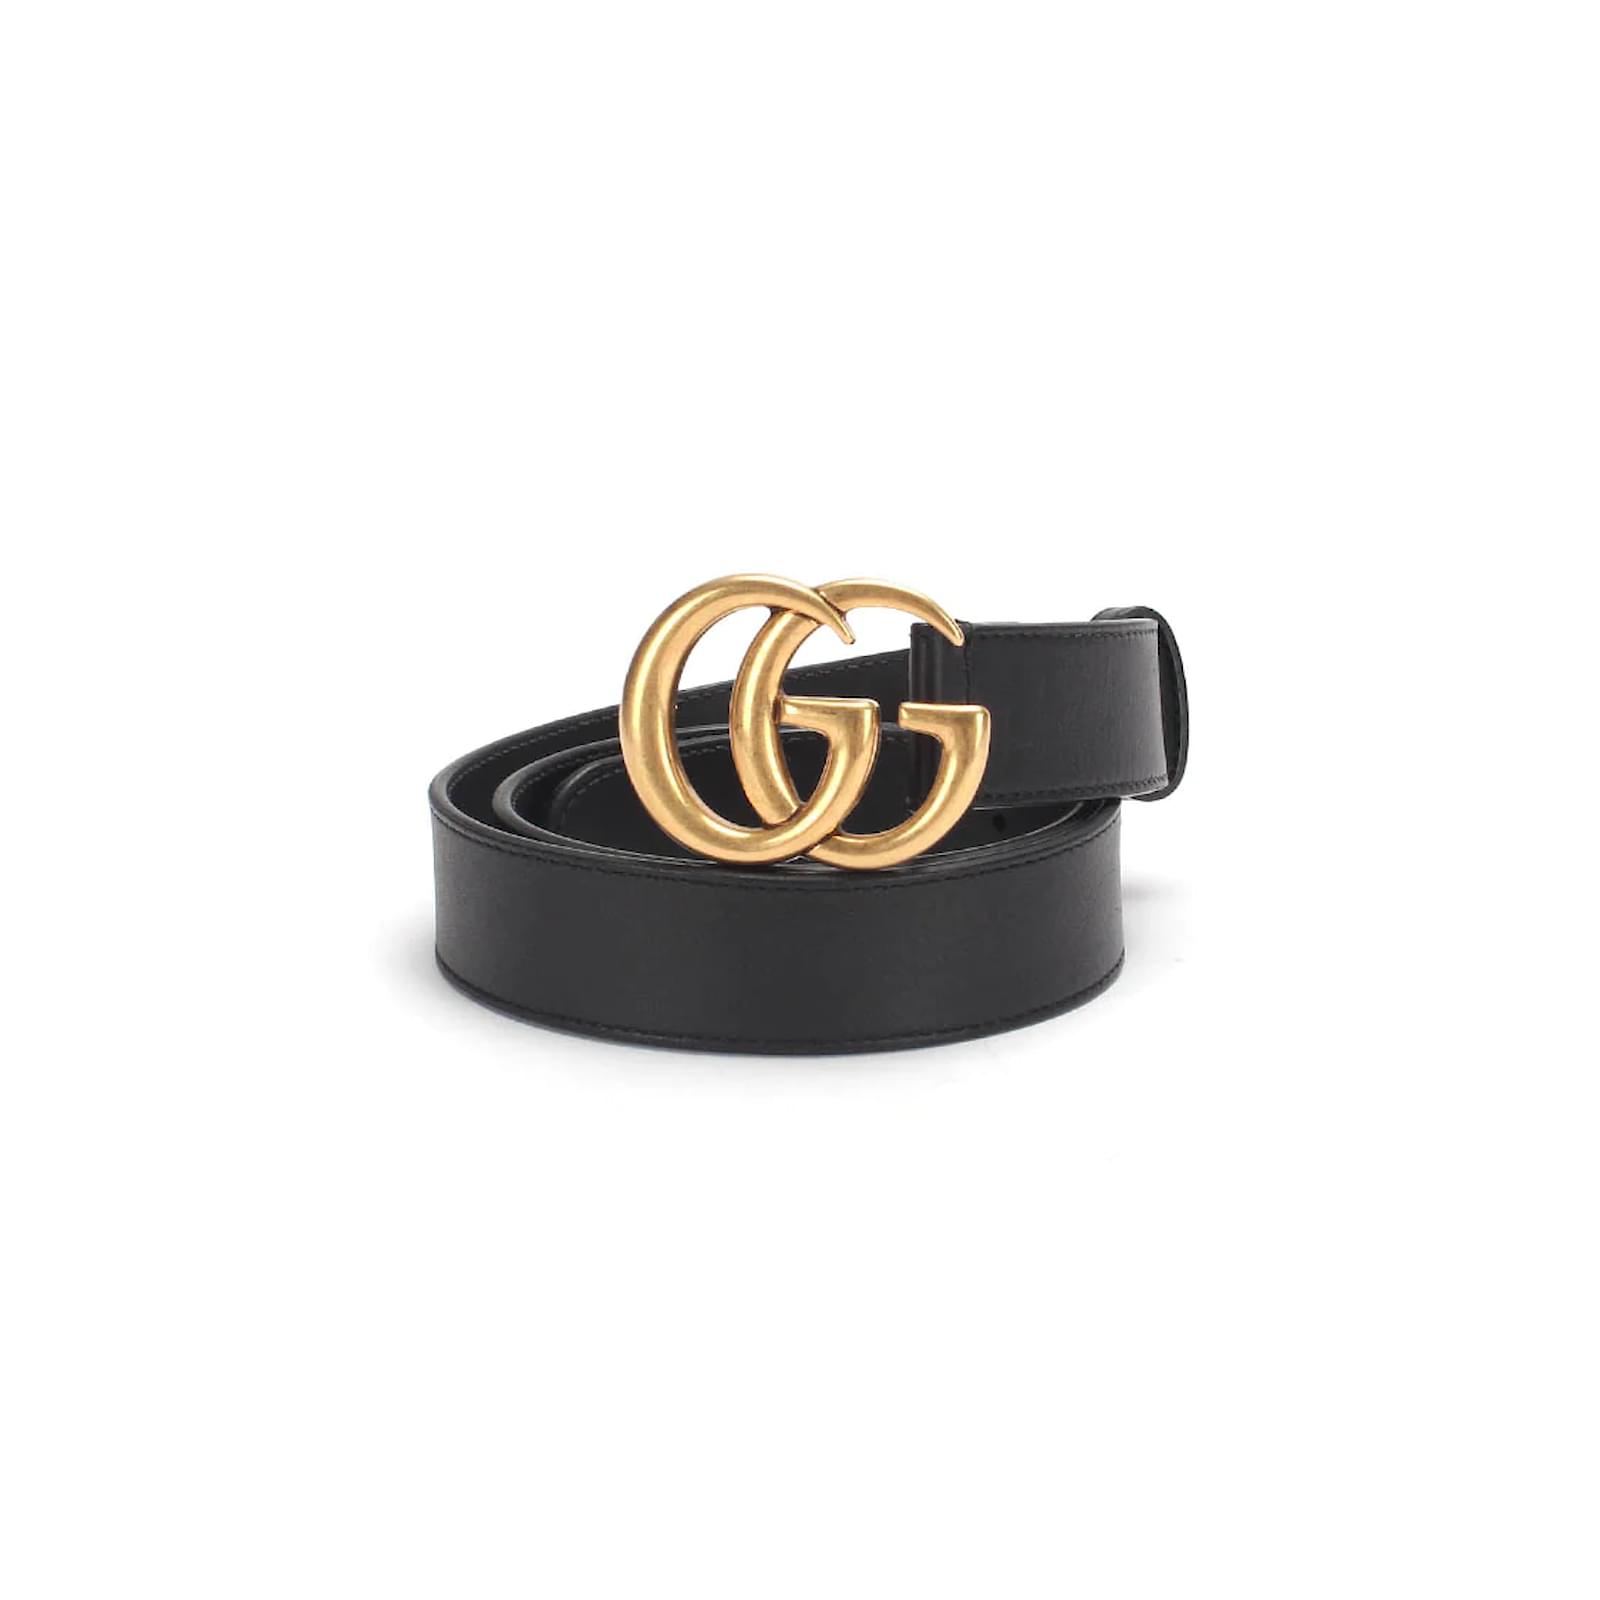 Gucci - GG Marmont Leather Belt Bag - Female - 80